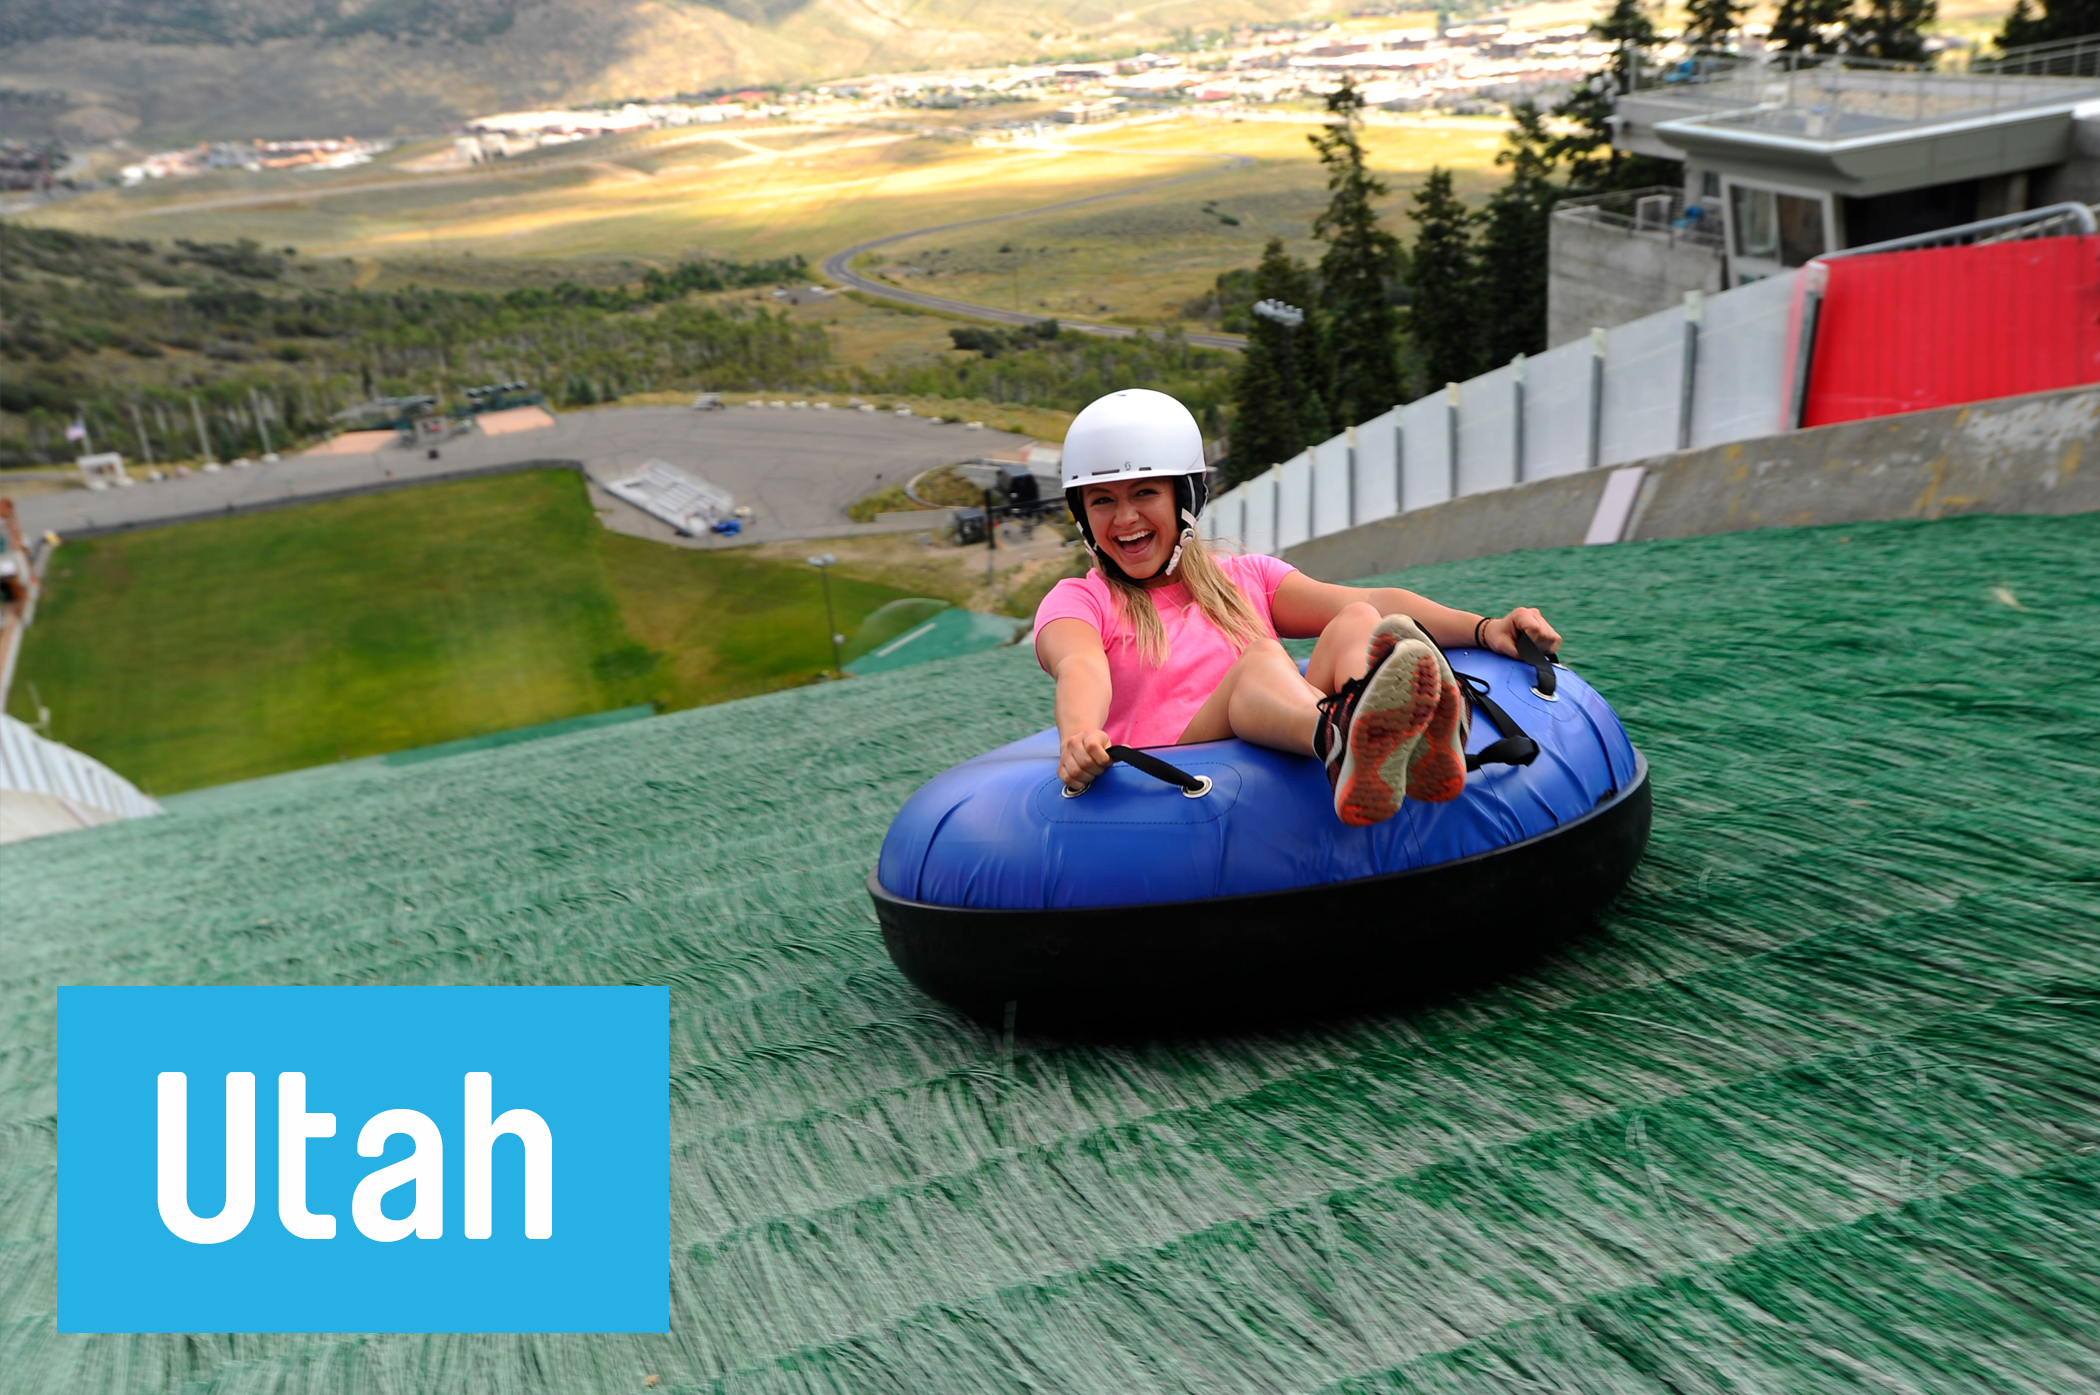 Hike the trails and play on the Mountain Challenge course at the Olympian-worthy (literally) <a href="http://utaholympiclegacy.org/" target="_blank">Utah Olympic Park</a> in Park City.